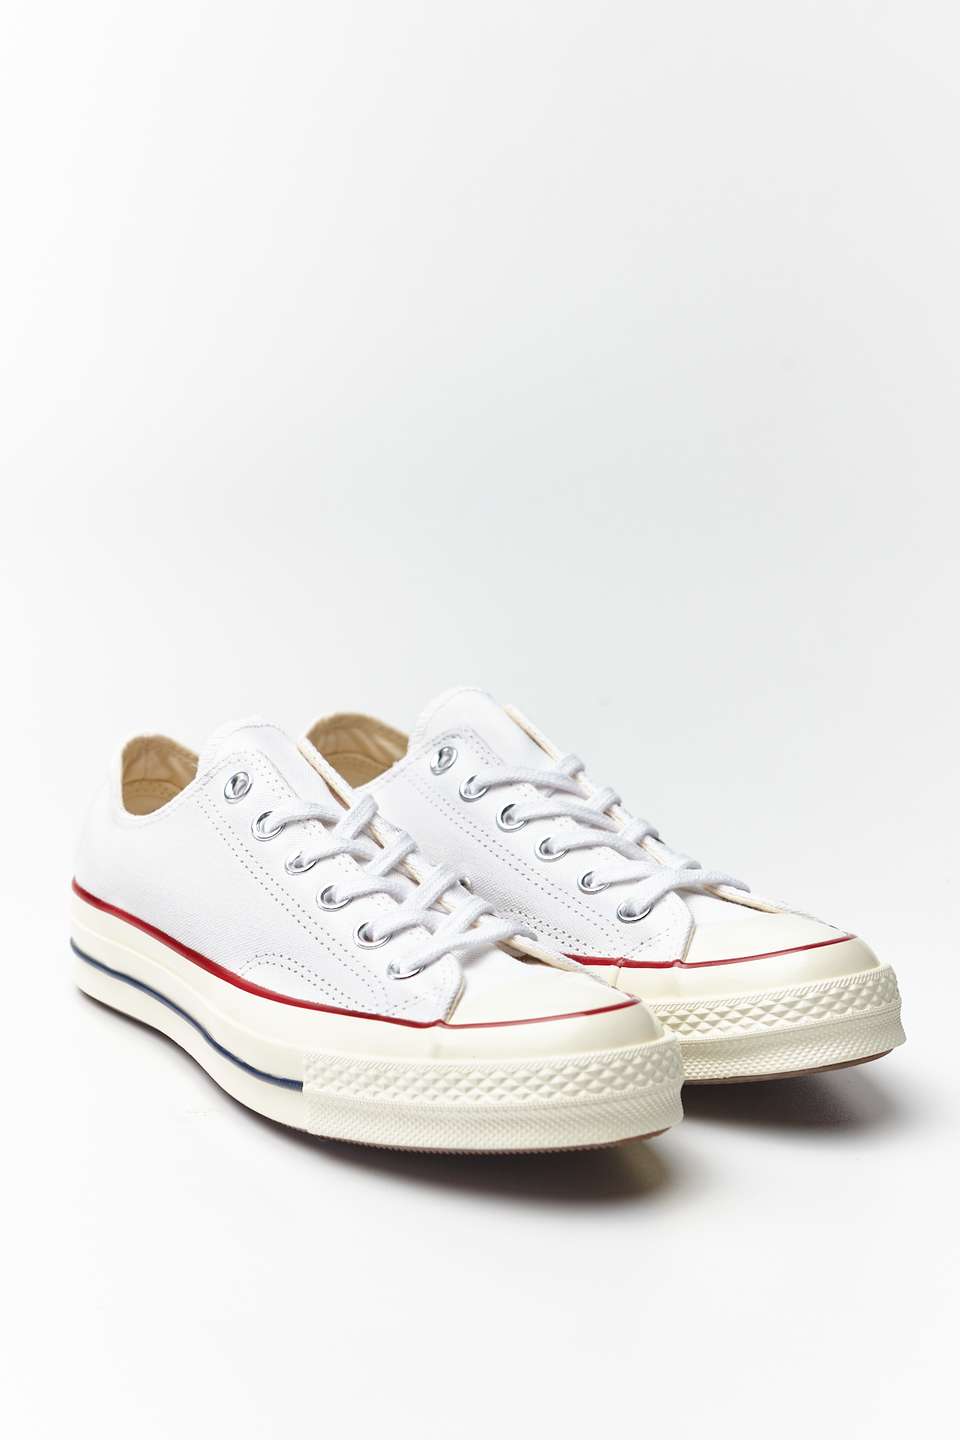 CHUCK TAYLOR ALL STAR 70 C162065 WHITE/RED/BLACK/WHITE